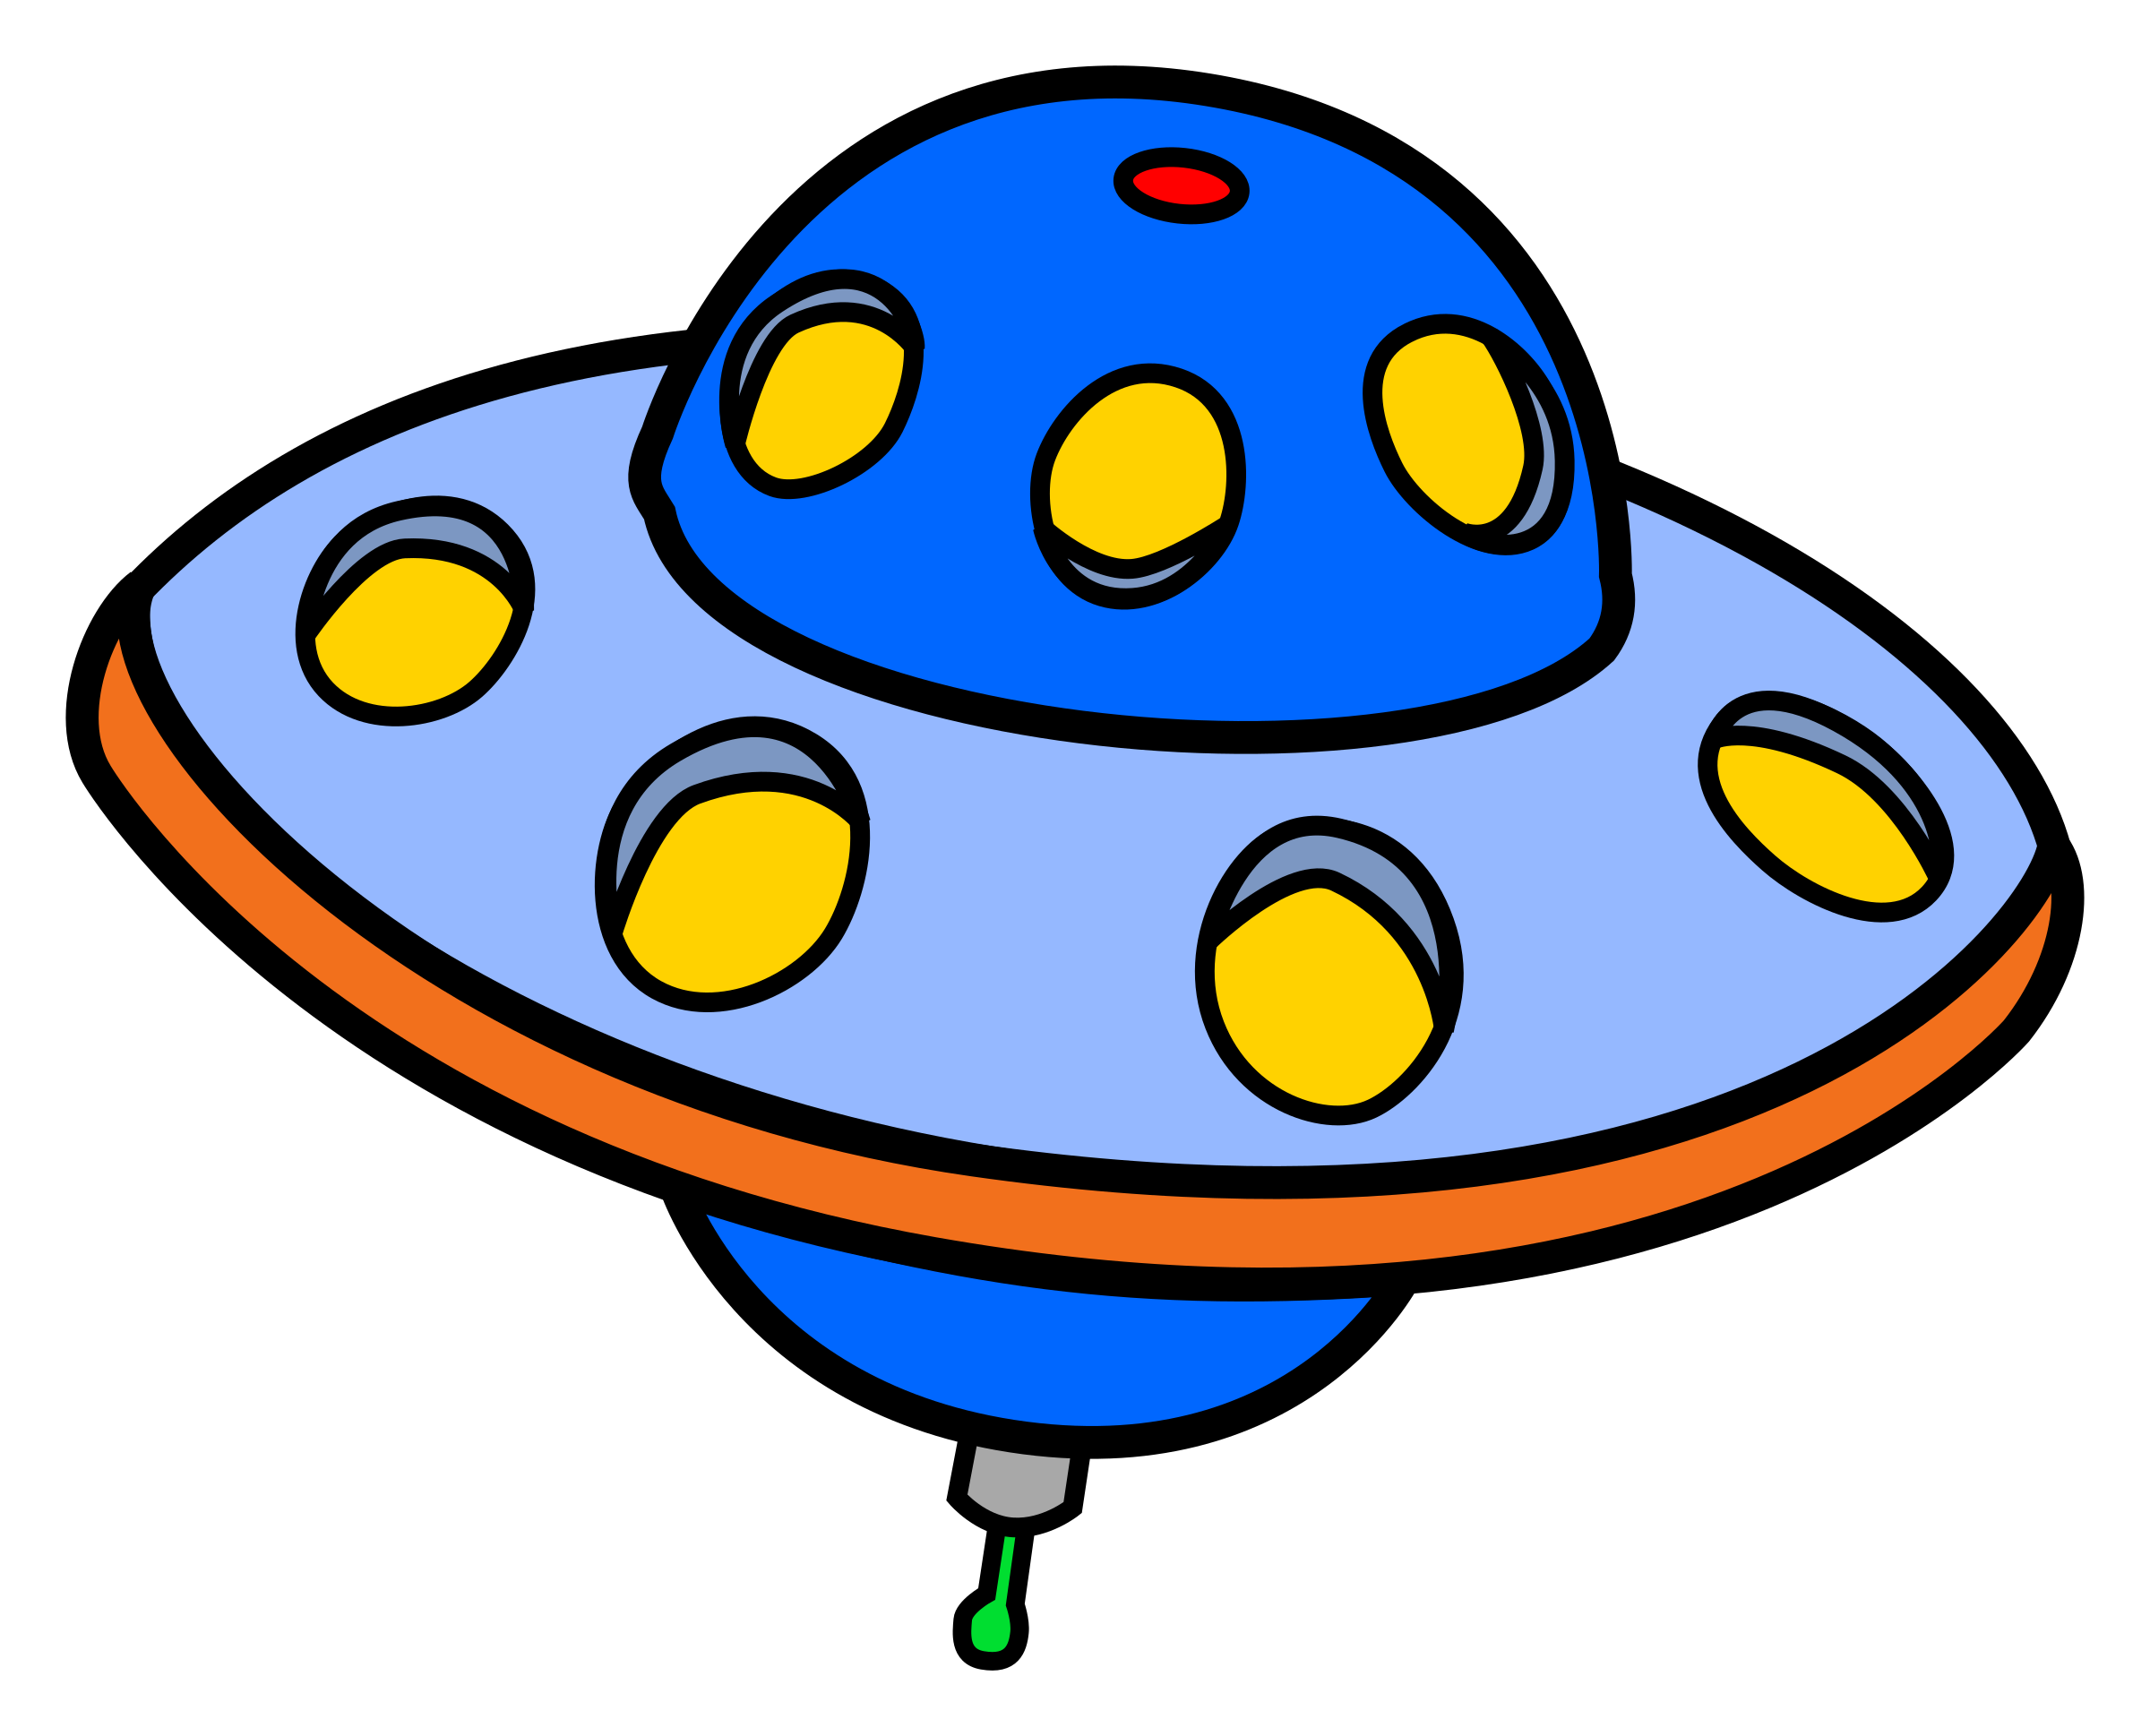 Saucer cliparts shop of. Spaceship clipart purple